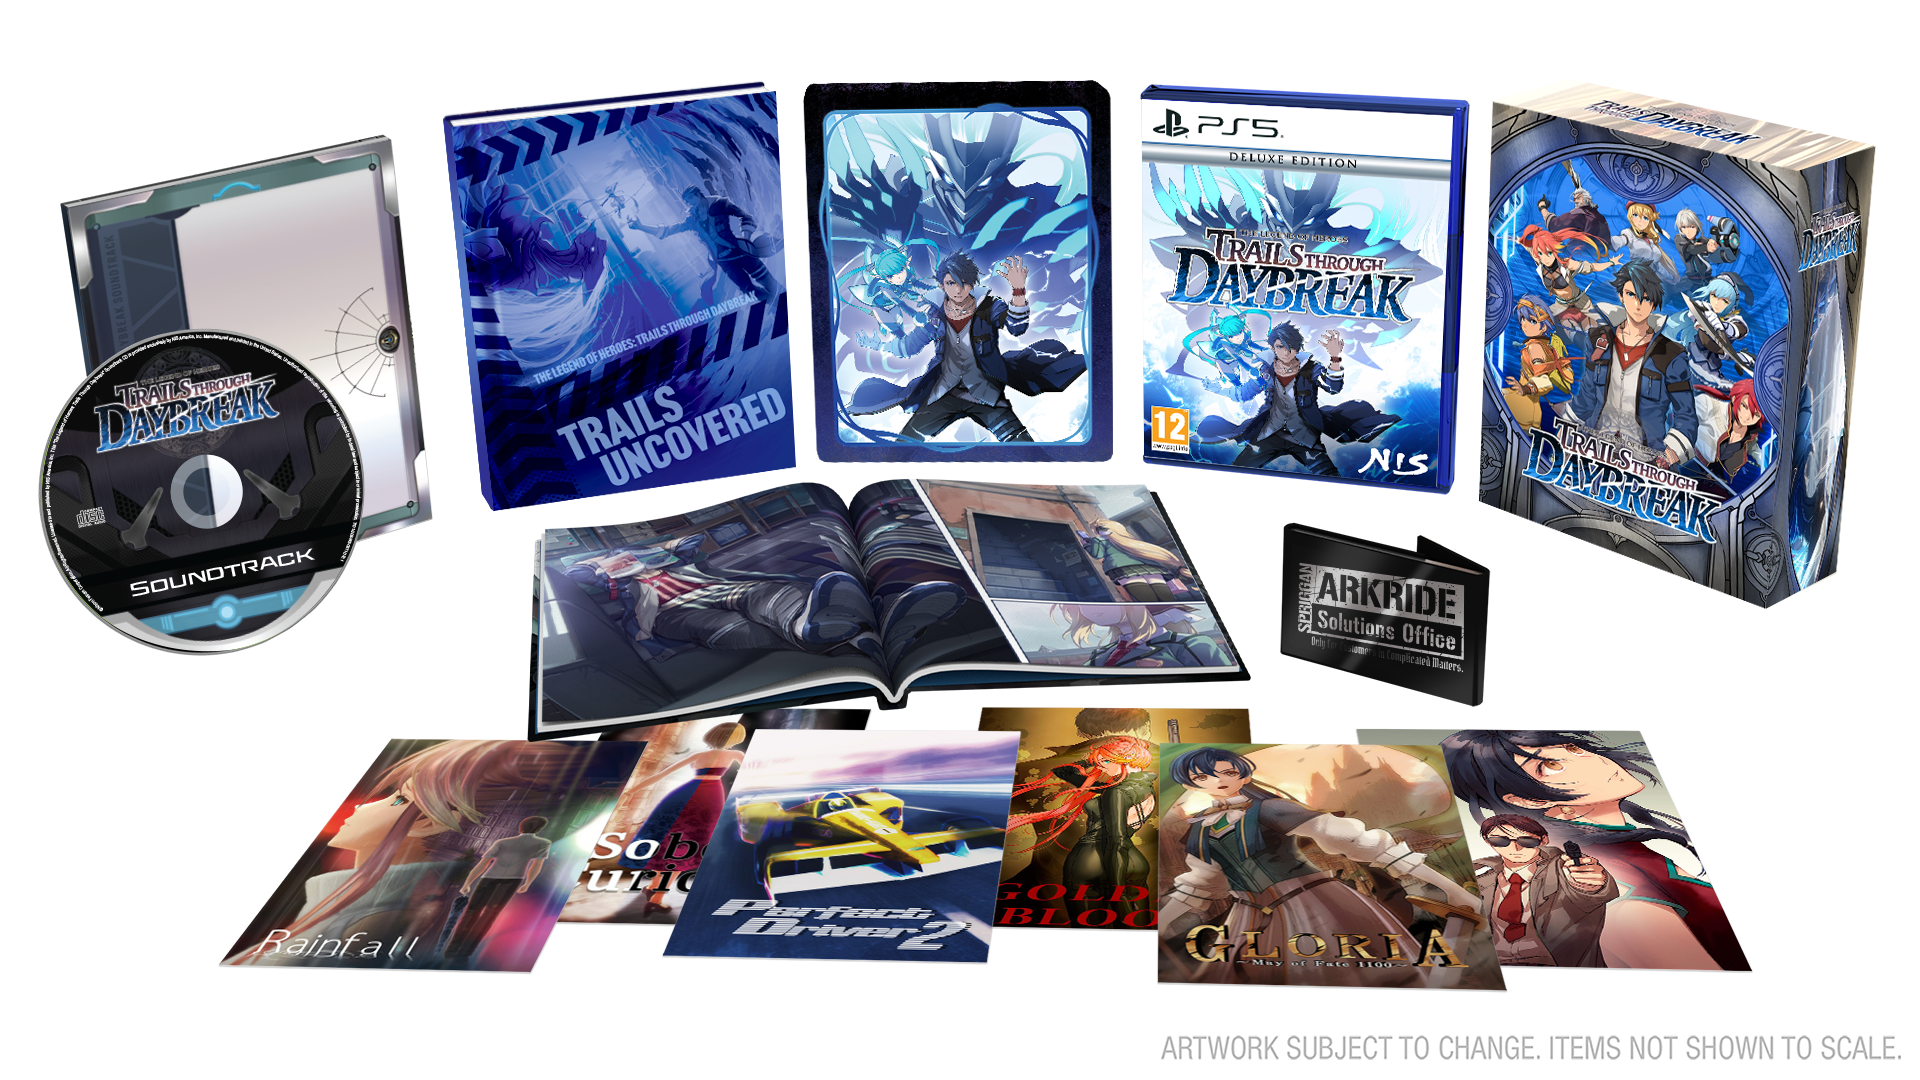 The Legend of Heroes: Trails through Daybreak - Limited Edition - PS5®